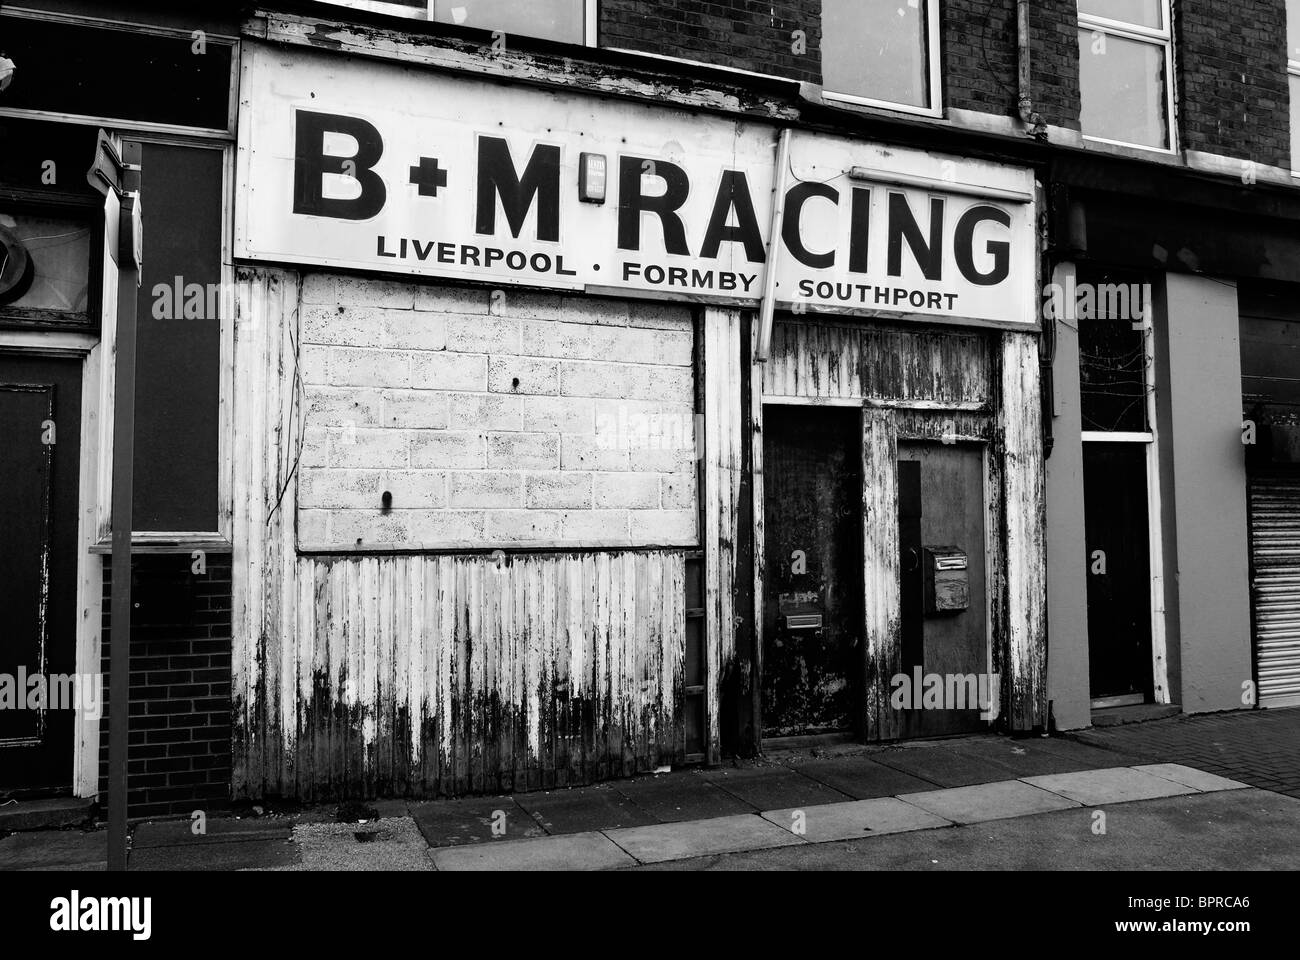 B+M Racing bookies. Businesses along Regent Road ( The Dock Road ) by Liverpool Docks in Merseyside. Stock Photo